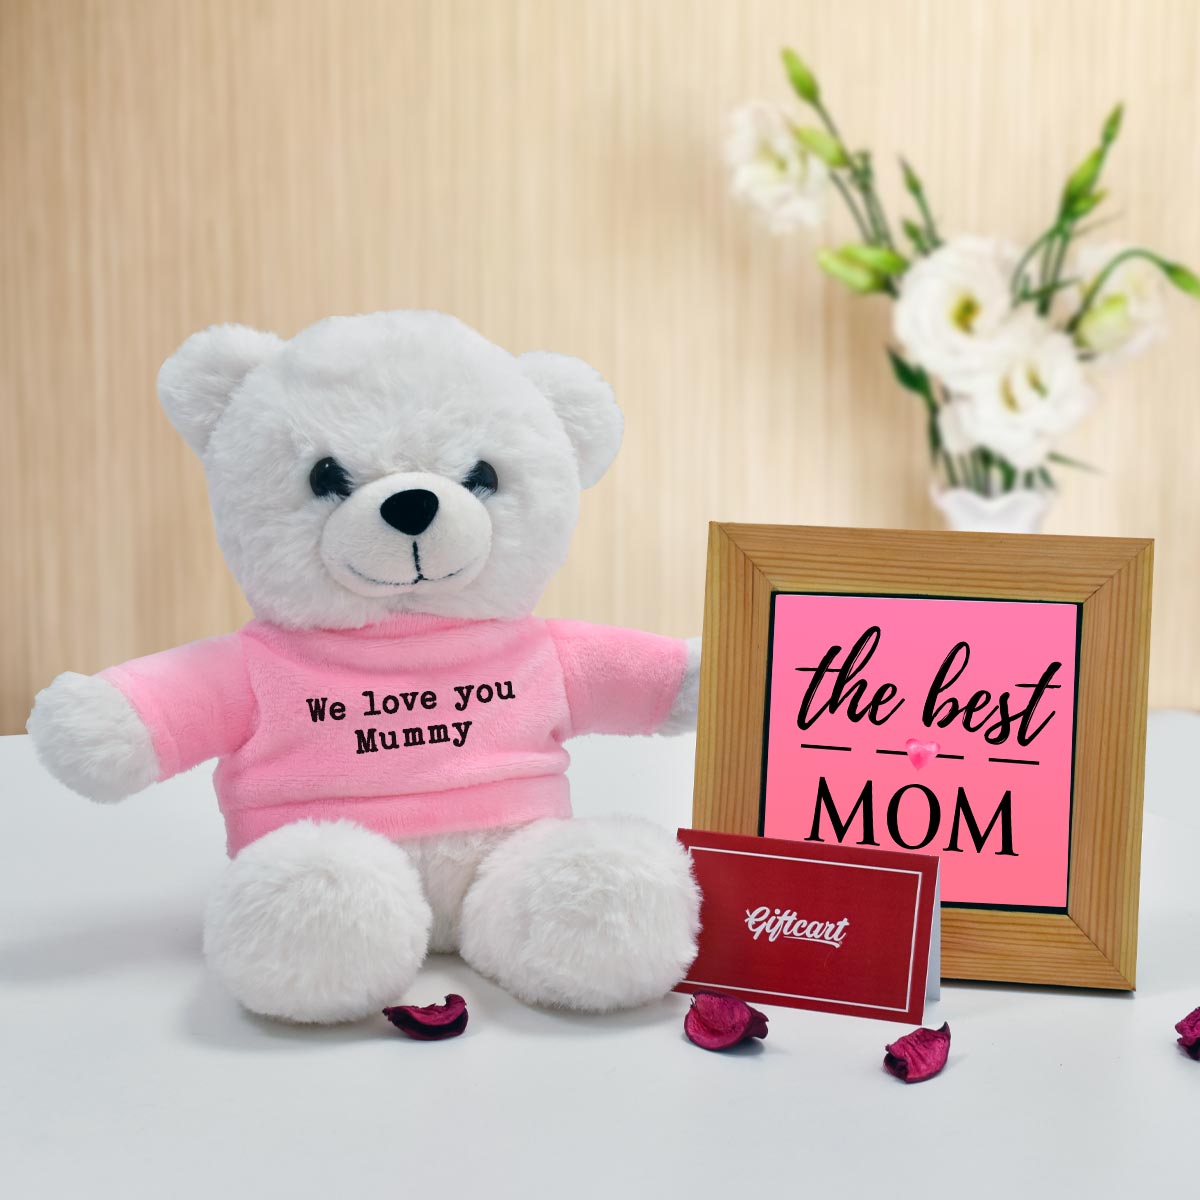 We Love you Mommy Teddy and Table Top with Greeting Card Hamper-3